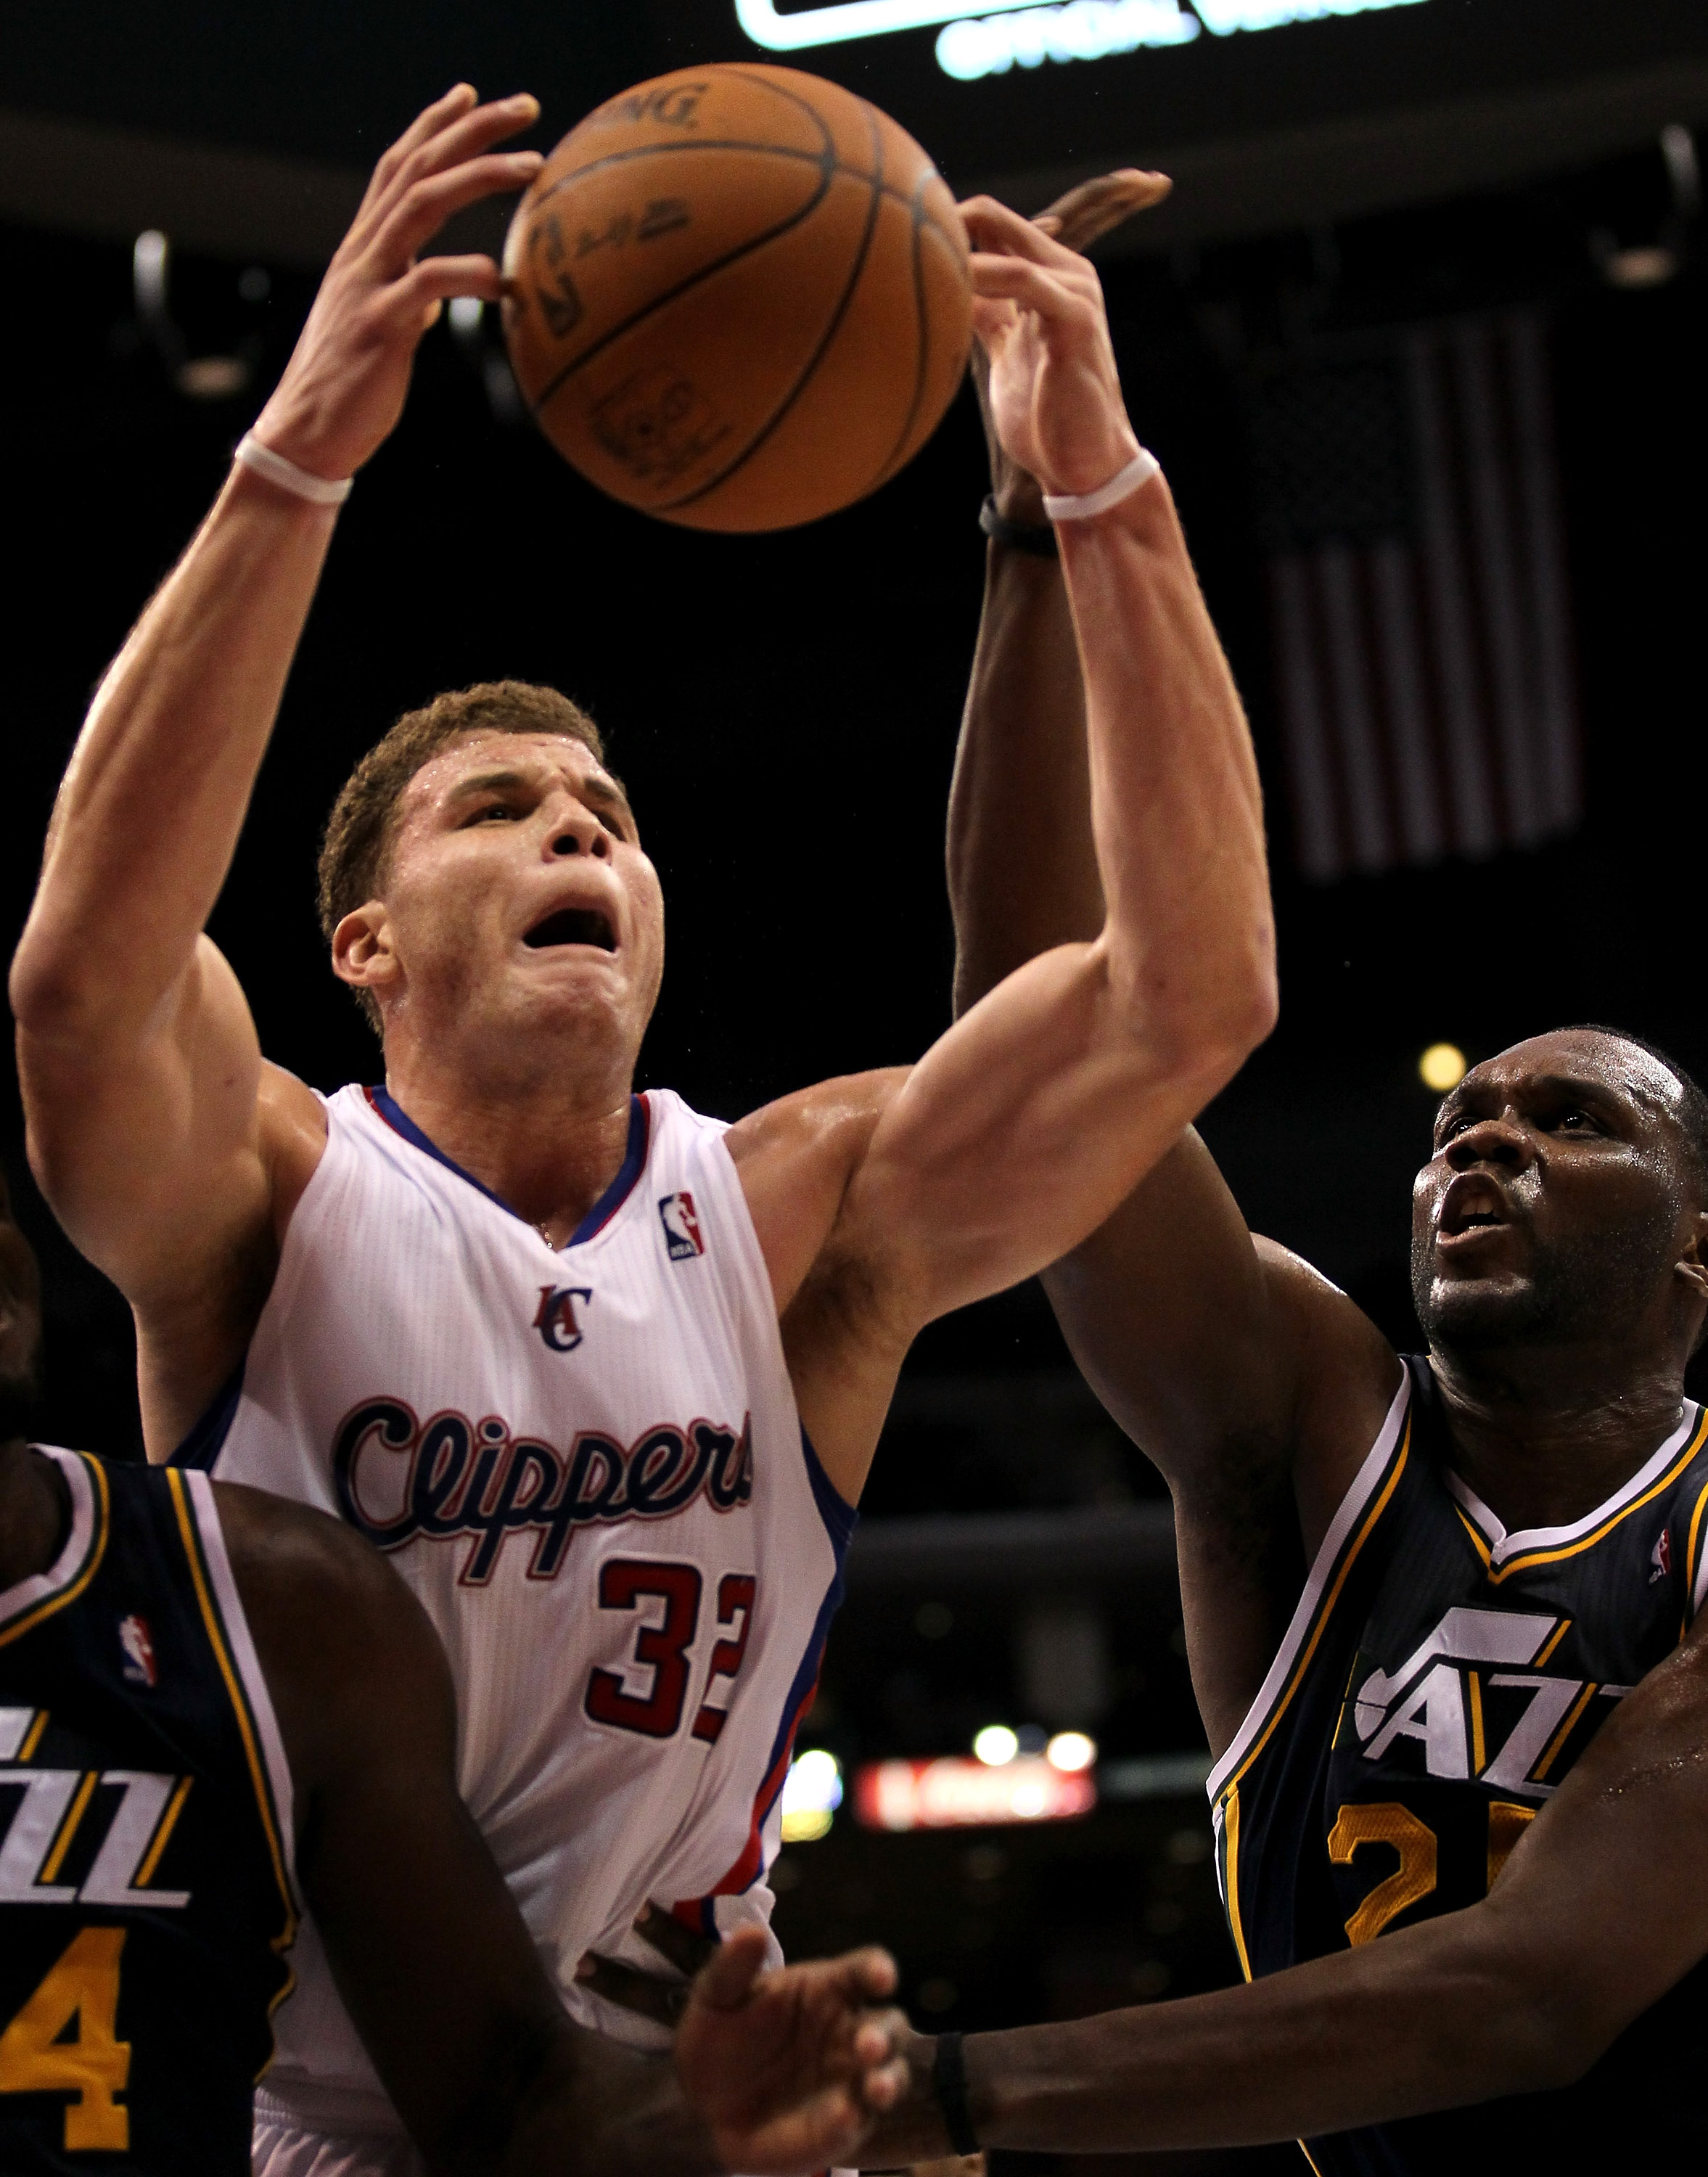 LOS ANGELES, CA - DECEMBER 29: Blake Griffin #32 of the Los Angeles Clippers goes for a rebound against Al Jefferson #25 of the Utah Jazz at Staples Center on December 29, 2010 in Los Angeles, California.       The Jazz won 103-85.  NOTE TO USER: User exp